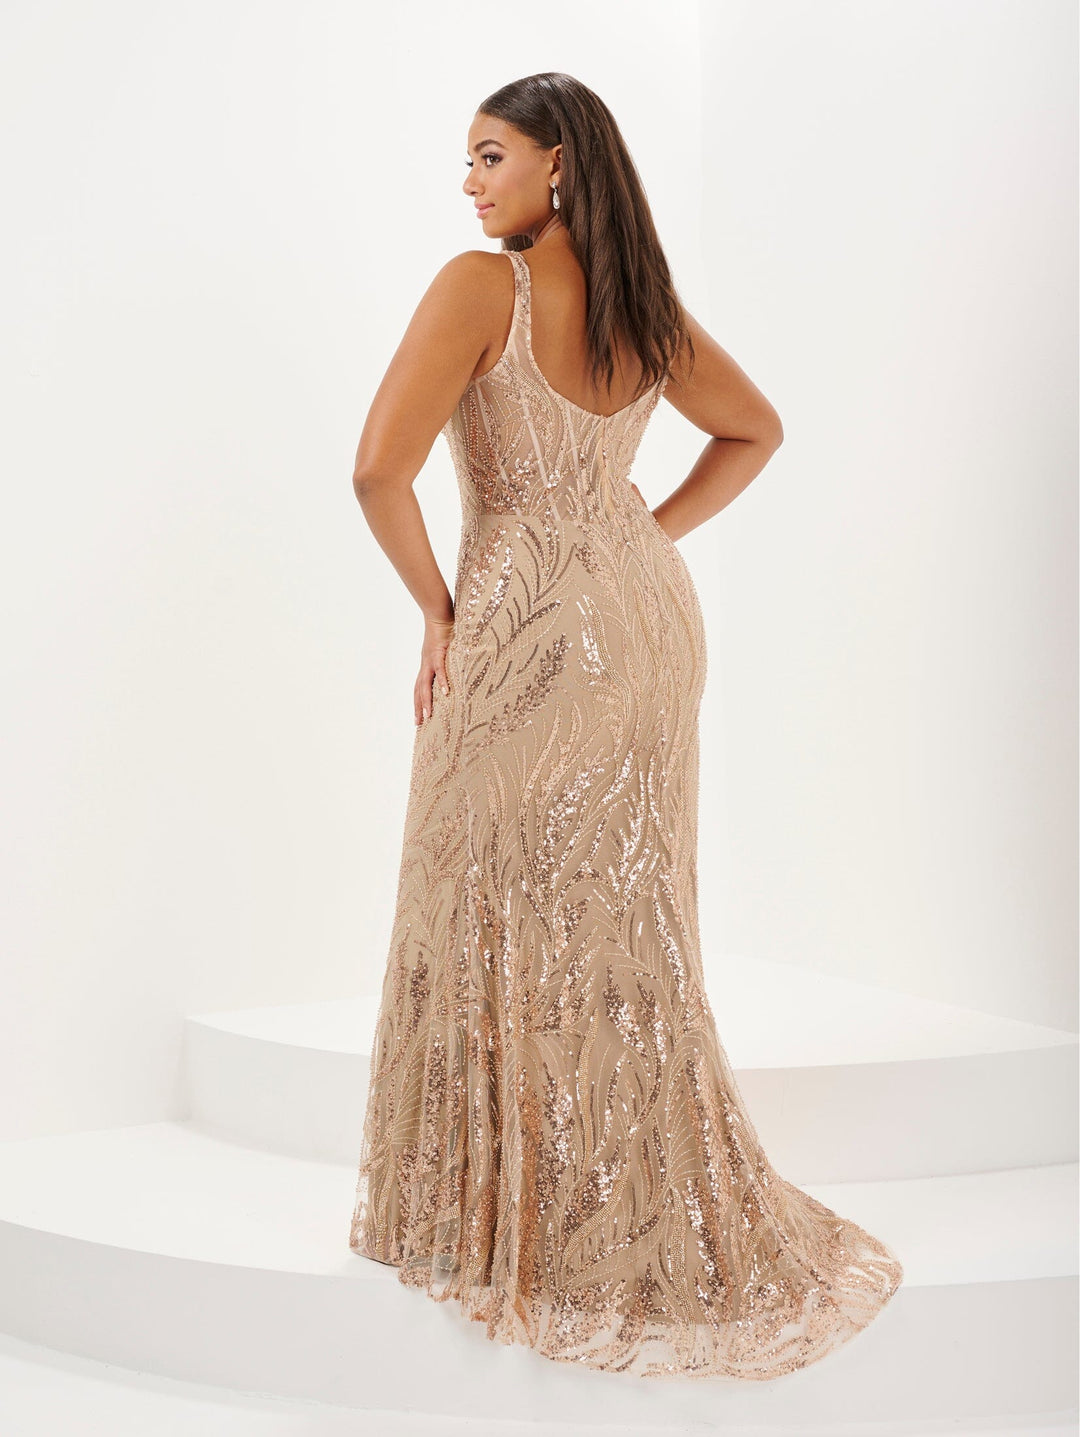 Plus Size Fitted Embellished Gown by Tiffany Designs 16124